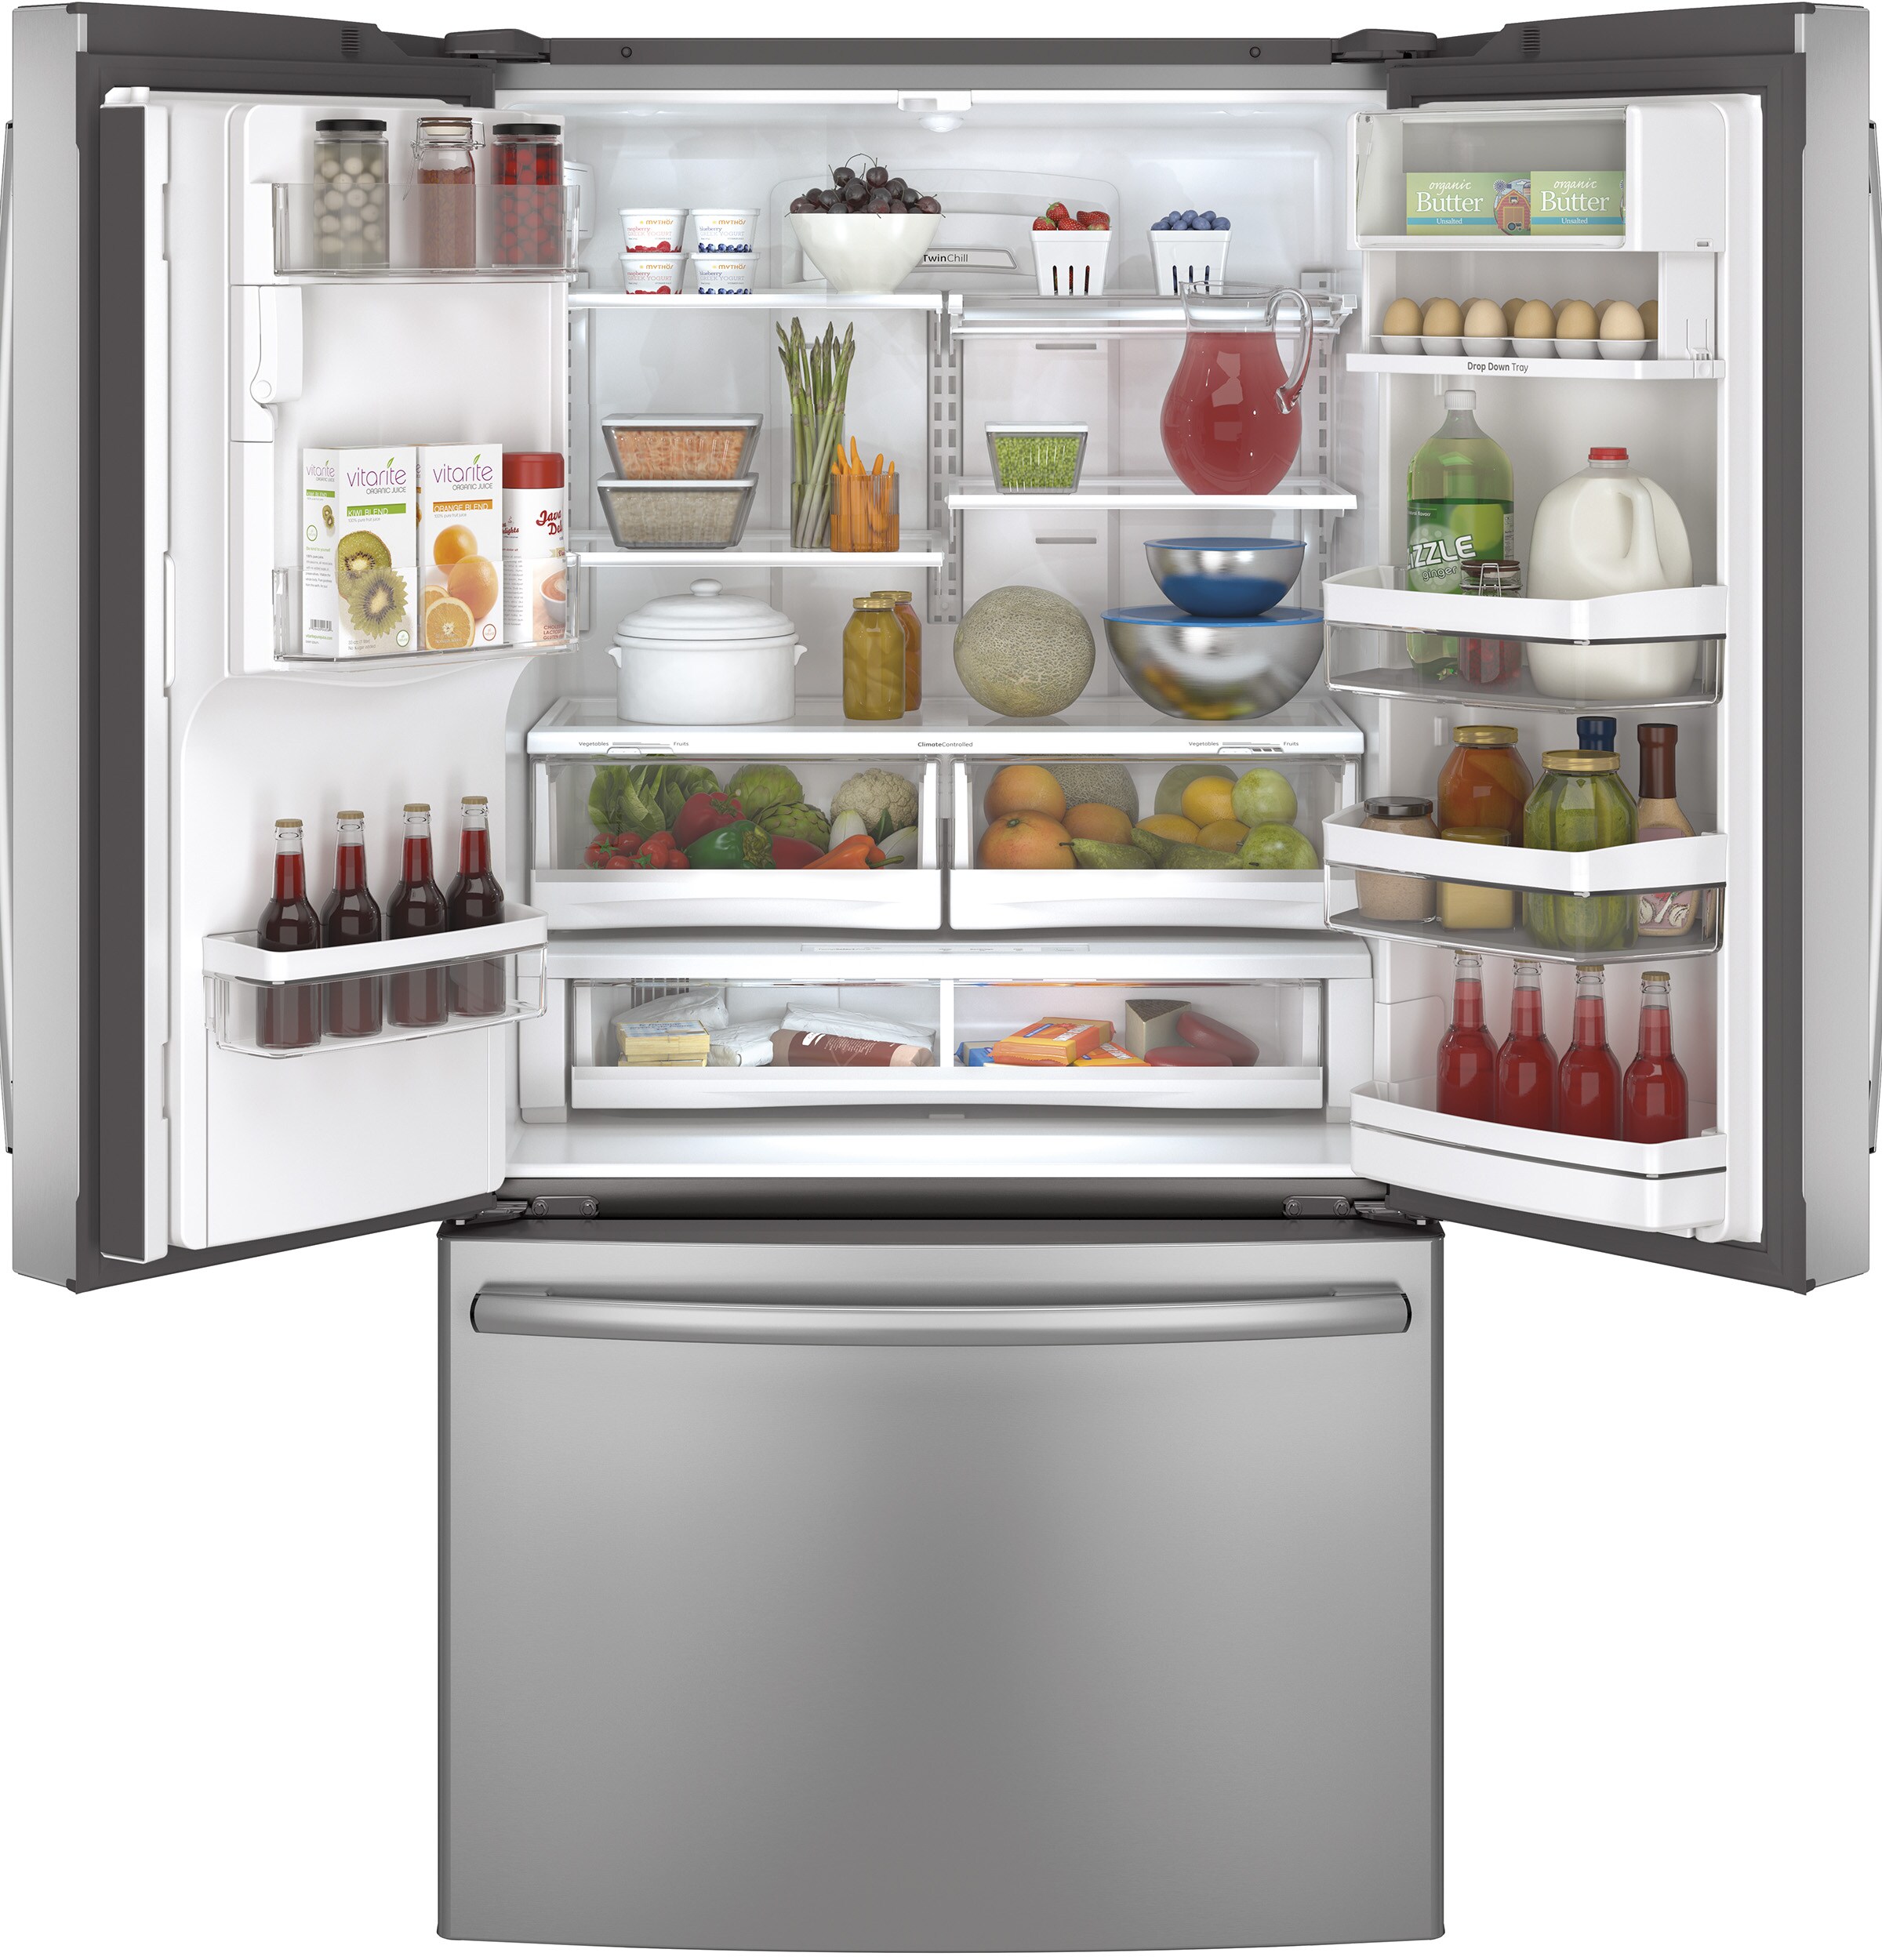 GE Profile 22.1-cu ft French Door Refrigerator with Ice Maker ...